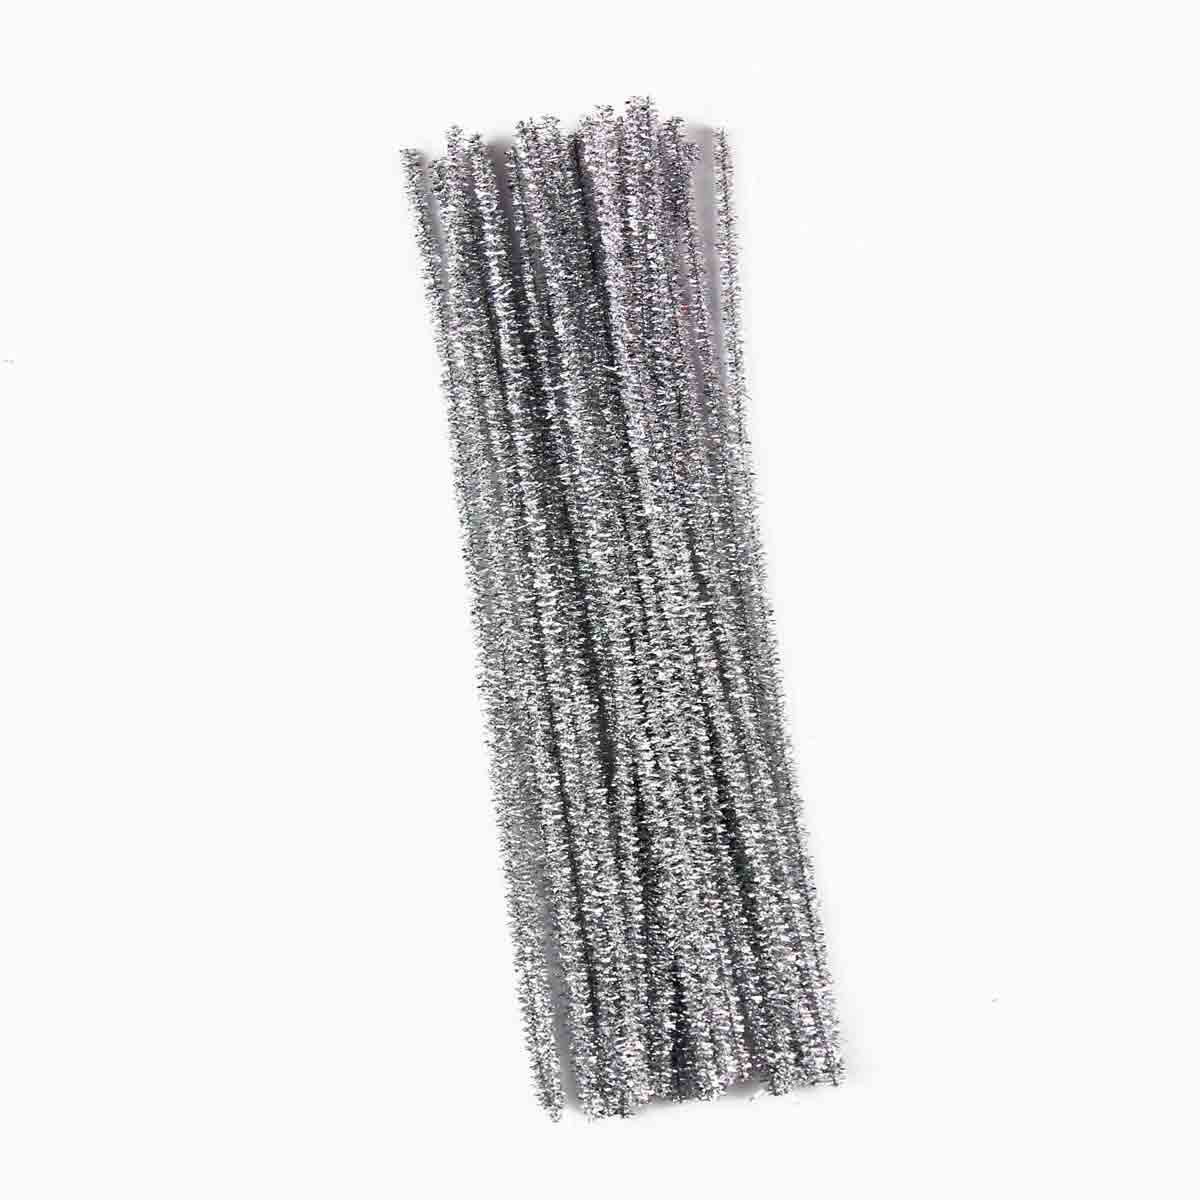 Make Shoppe Tinsel Chenille Stem, Silver, 30 Count, 6Mm X 12Inch